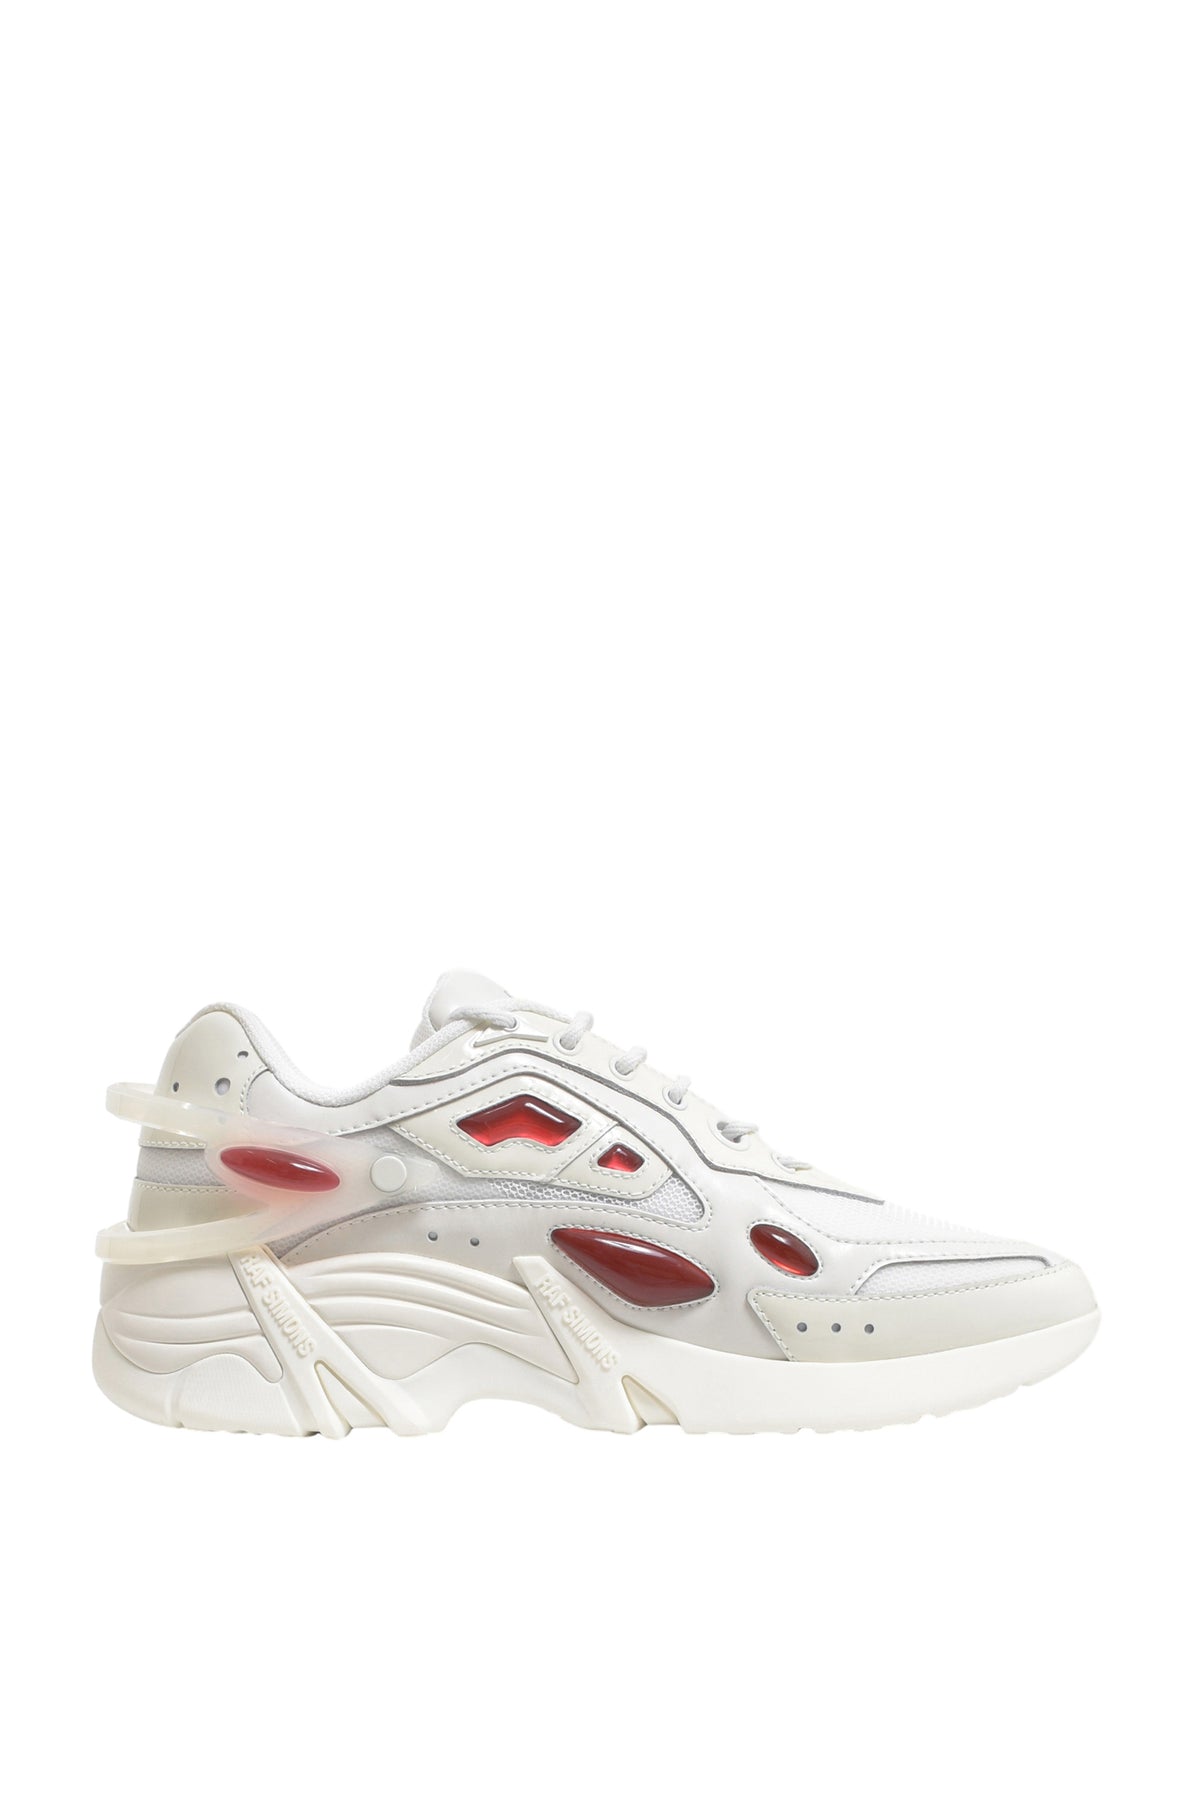 CYLON-21 / OFFWHT RED